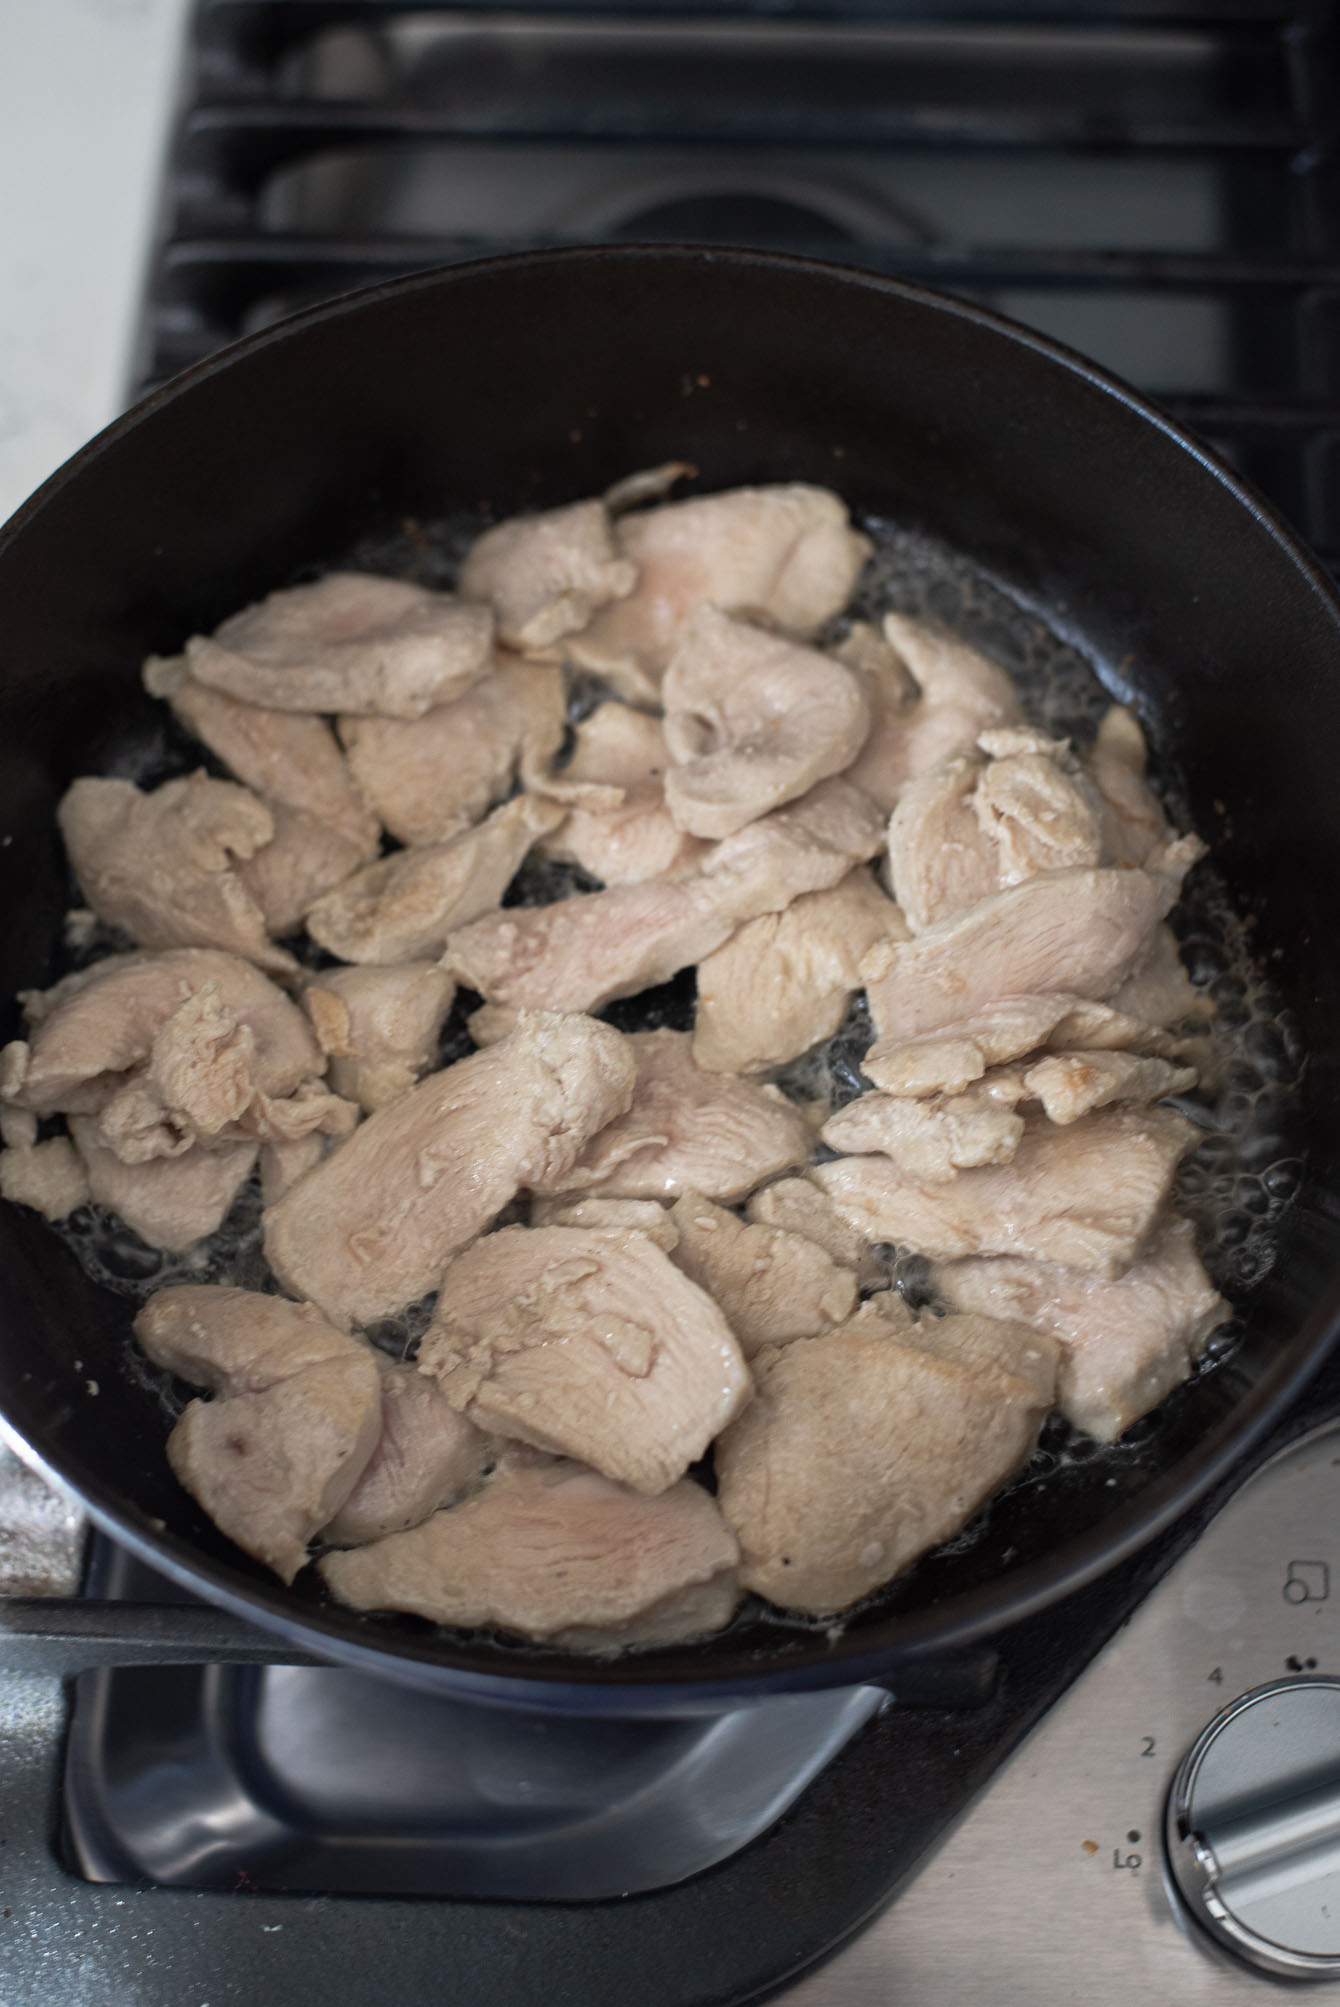 Chicken pieces are cooked in a pot to make Thai red curry chicken.